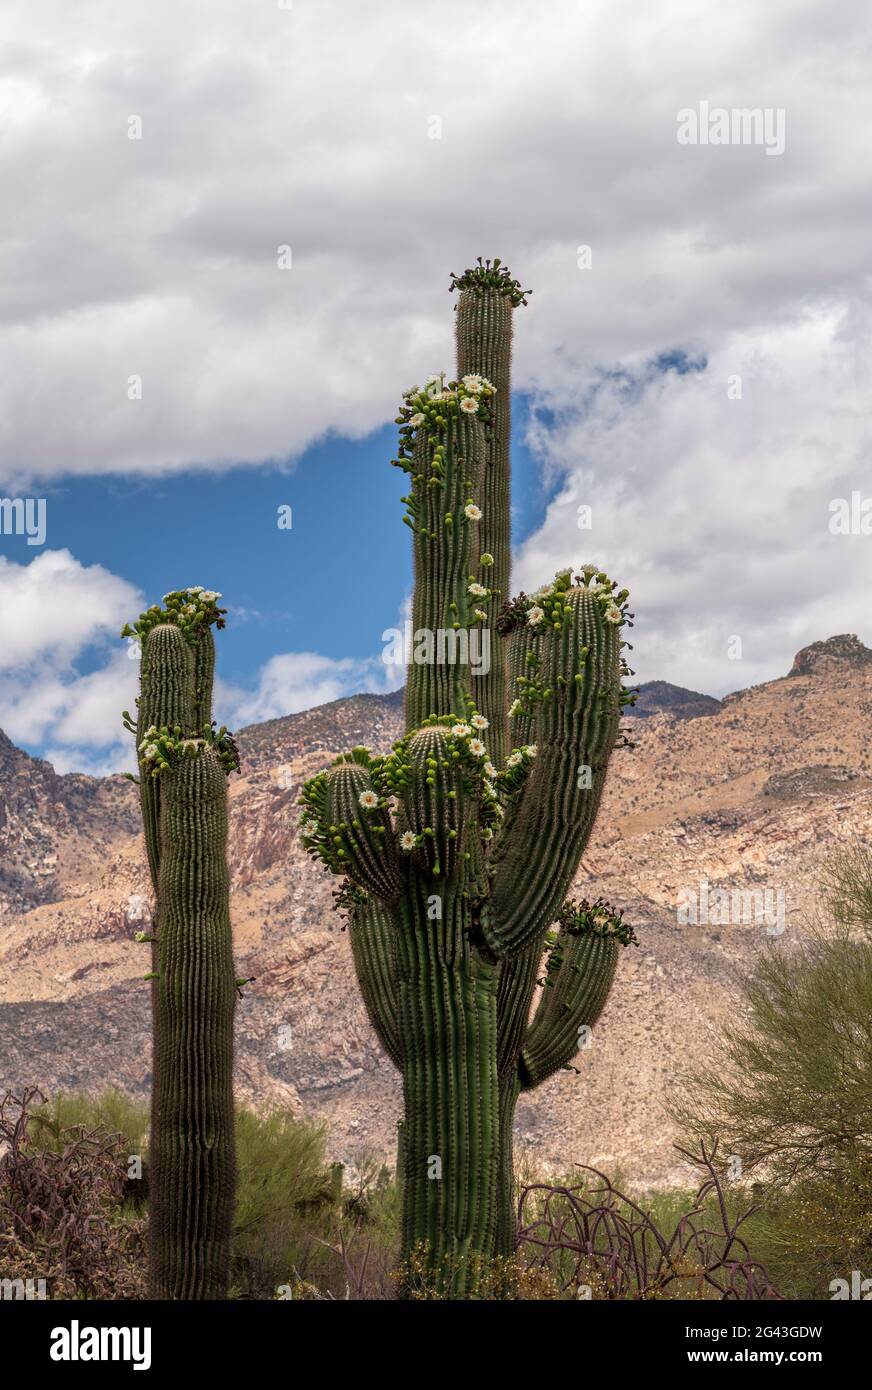 Saguaro cactus sprouted an unprecedented number of 'side blooms' during May, their typical Spring flowering season, Sonoran Desert, Tucson, Arizona, U Stock Photo